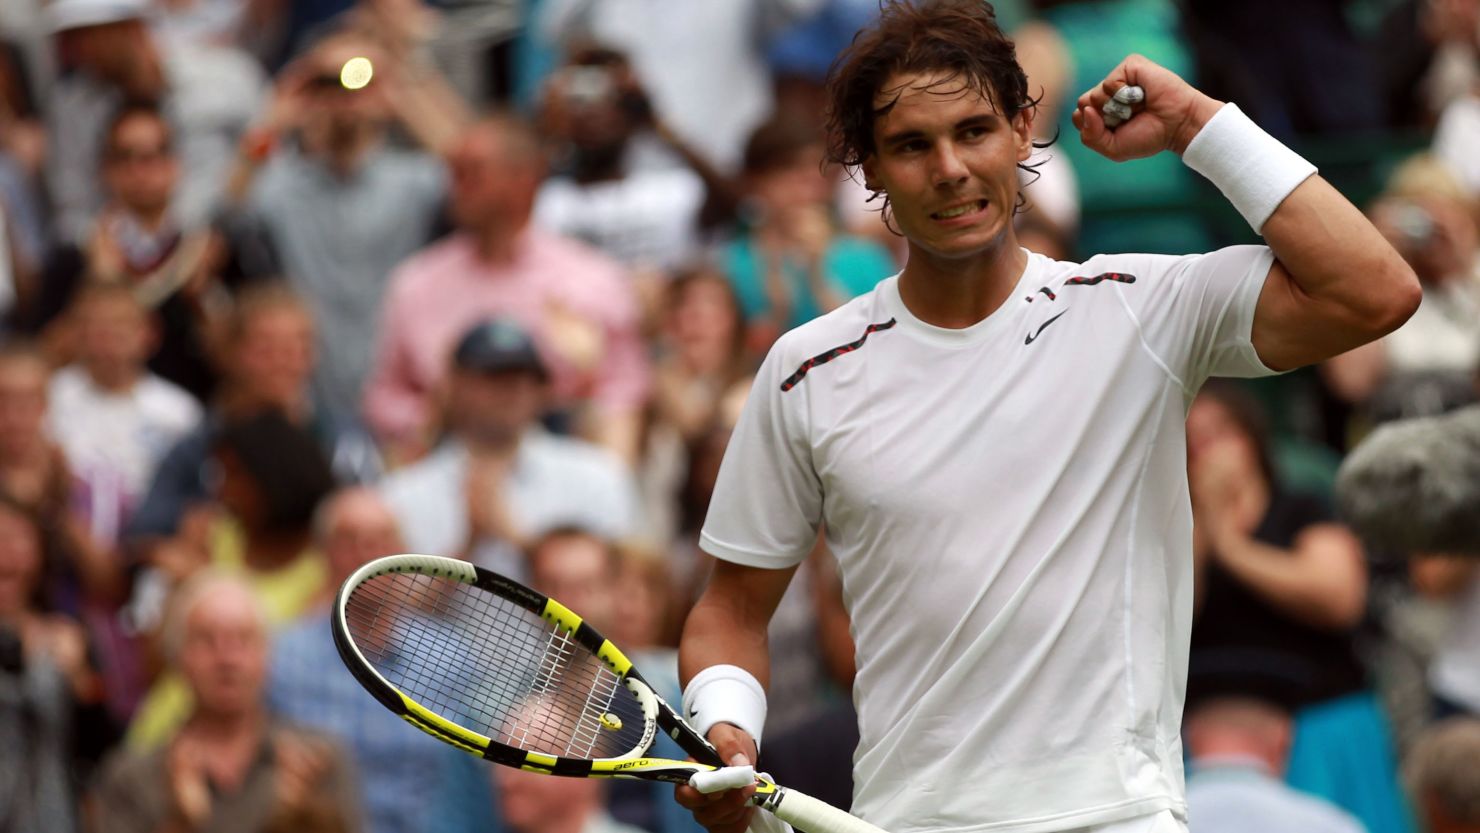 World number two Rafael Nadal fought back well after losing the first four games of his first round match.